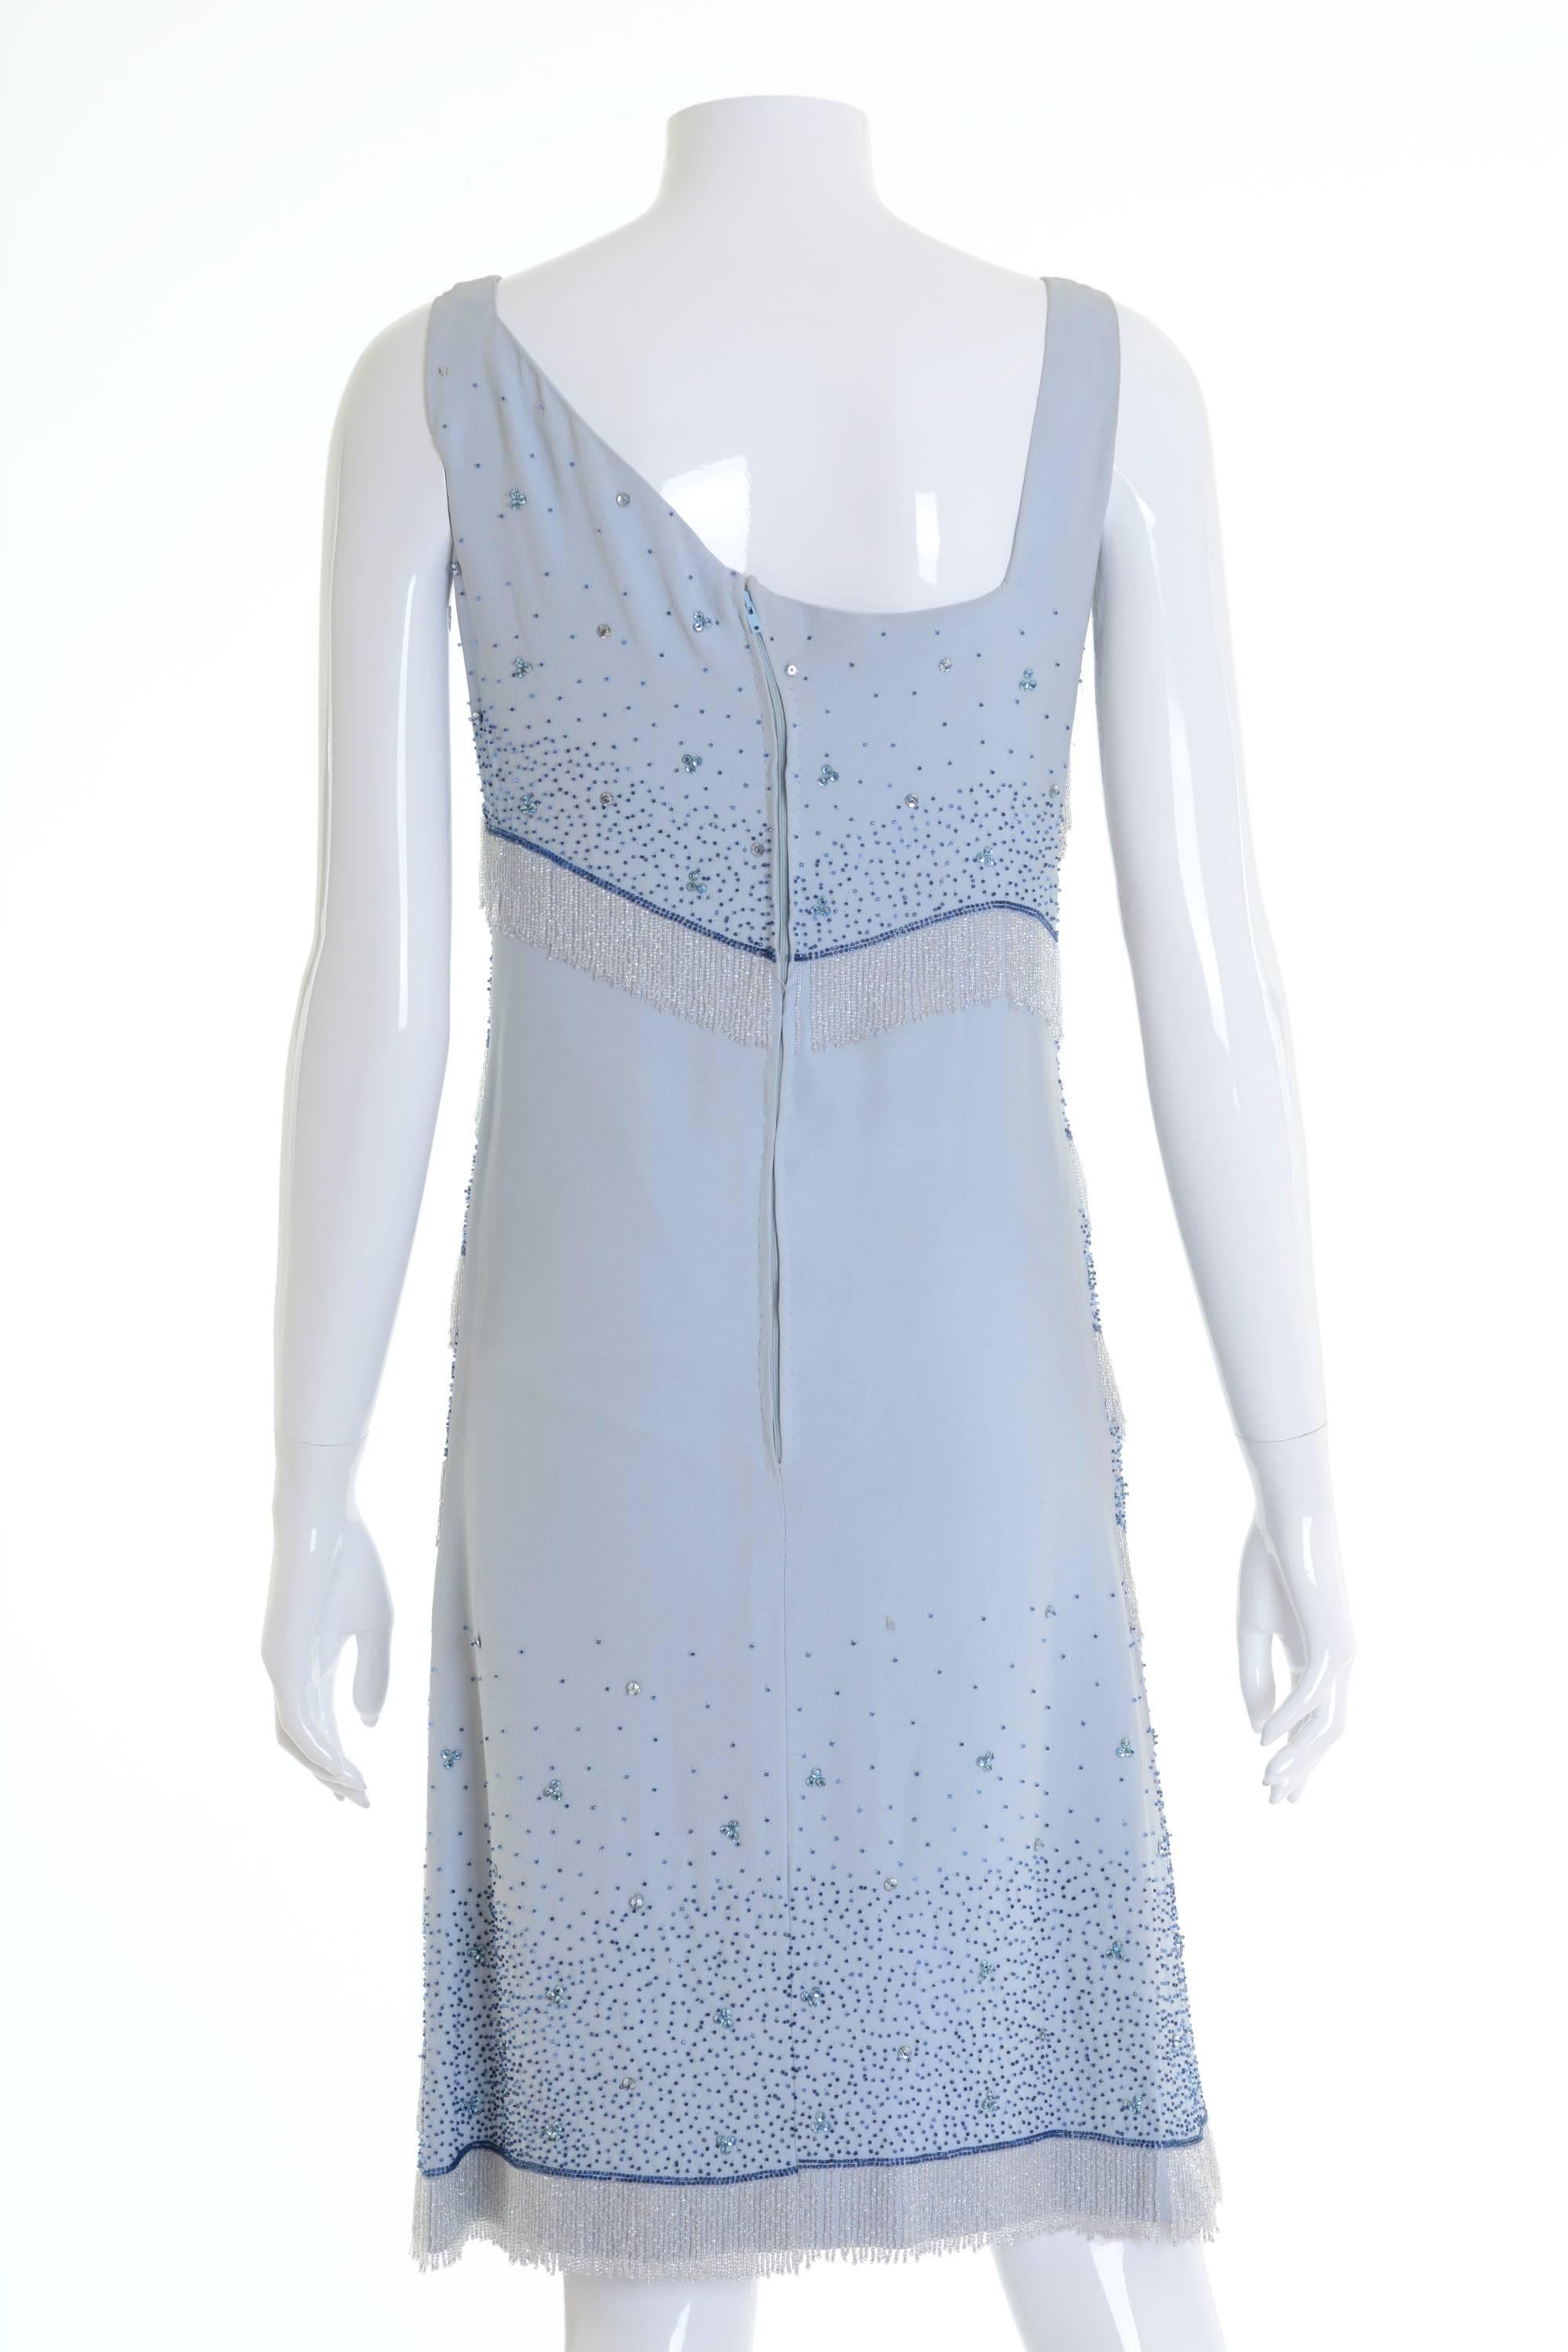 This amazing tailored 1960s Italian cocktail dress is in a fabulous light blue silk fabric with amazing glass beaded, rhinestones and fringes. It has back zip closure and hook. It's fully lined.

Good vintage condition

Label: N/A
Fabric: